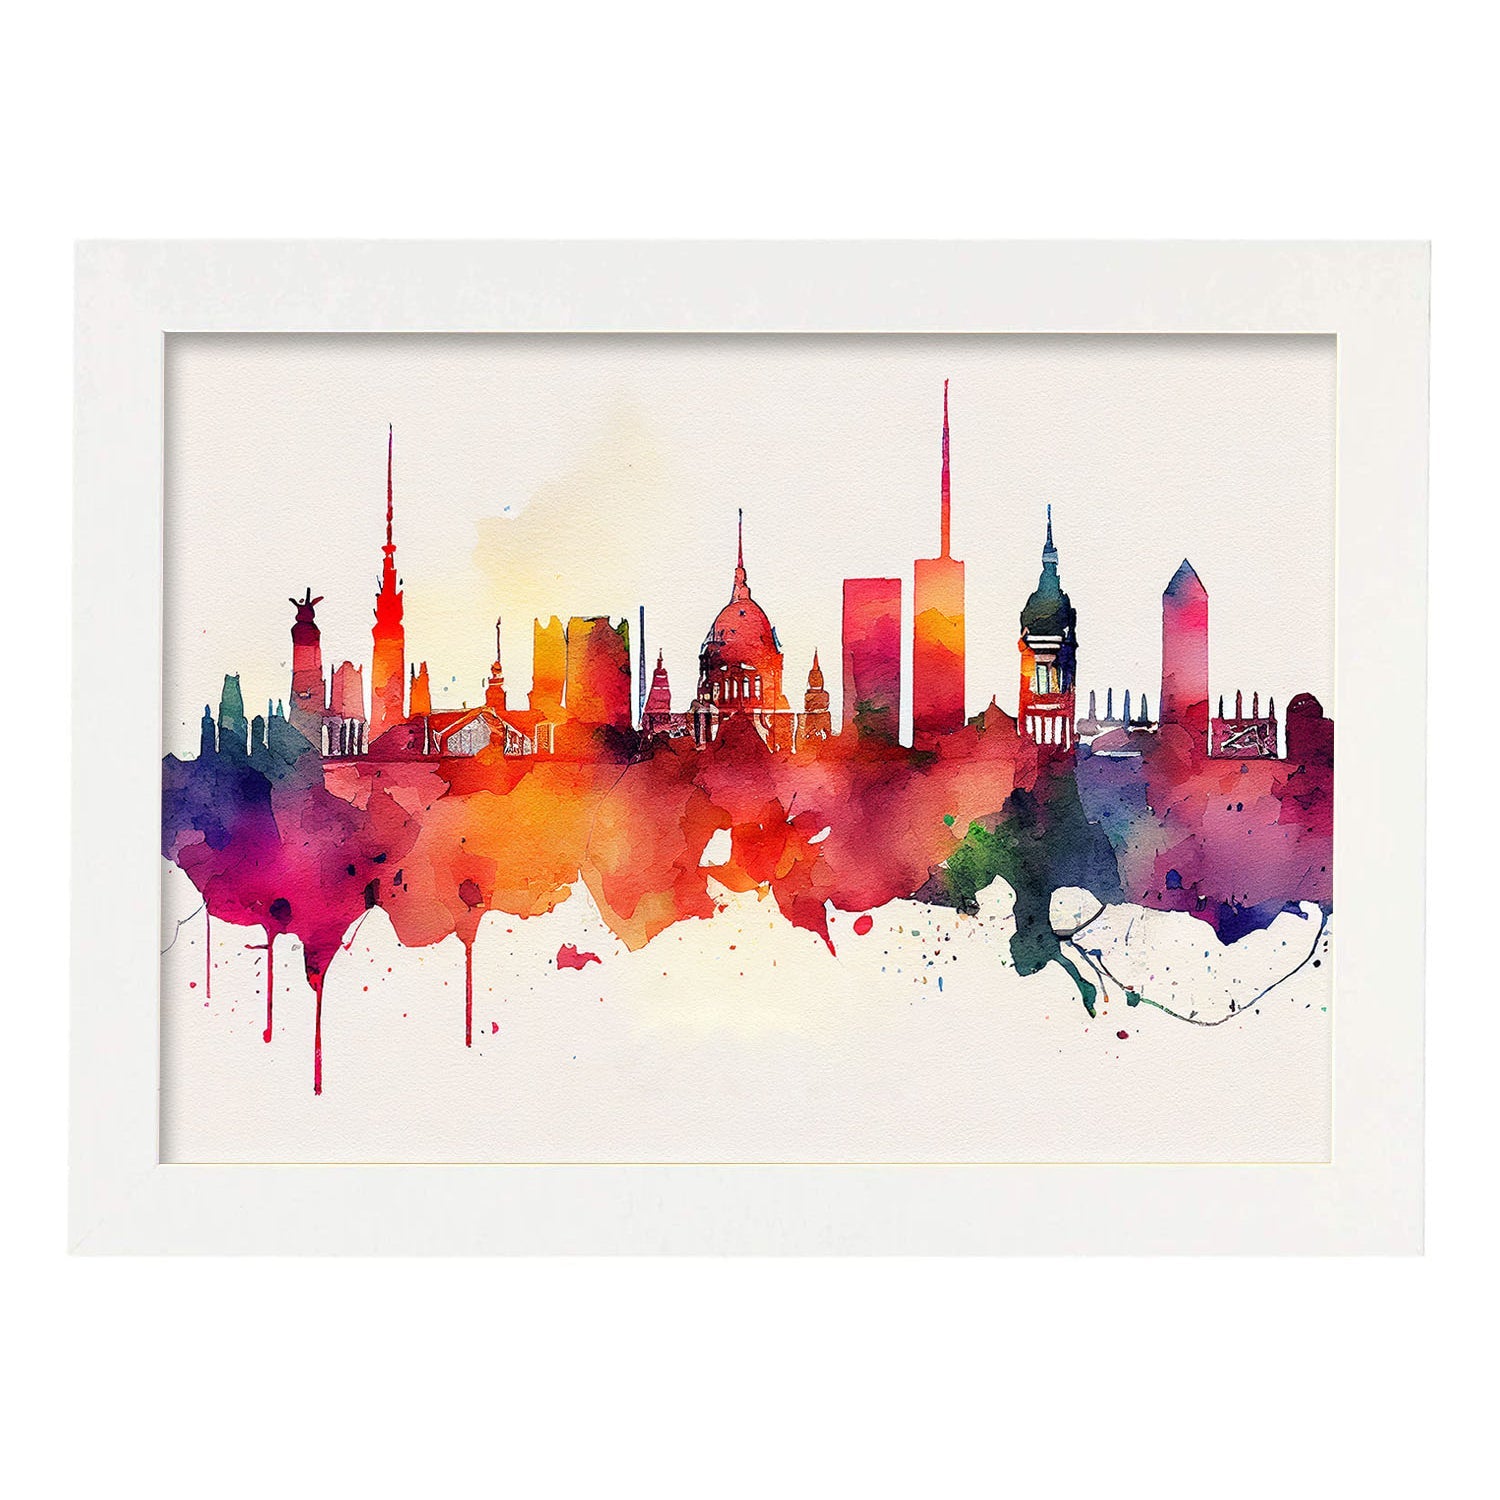 Nacnic watercolor of a skyline of the city of Berlin_3. Aesthetic Wall Art Prints for Bedroom or Living Room Design.-Artwork-Nacnic-A4-Marco Blanco-Nacnic Estudio SL